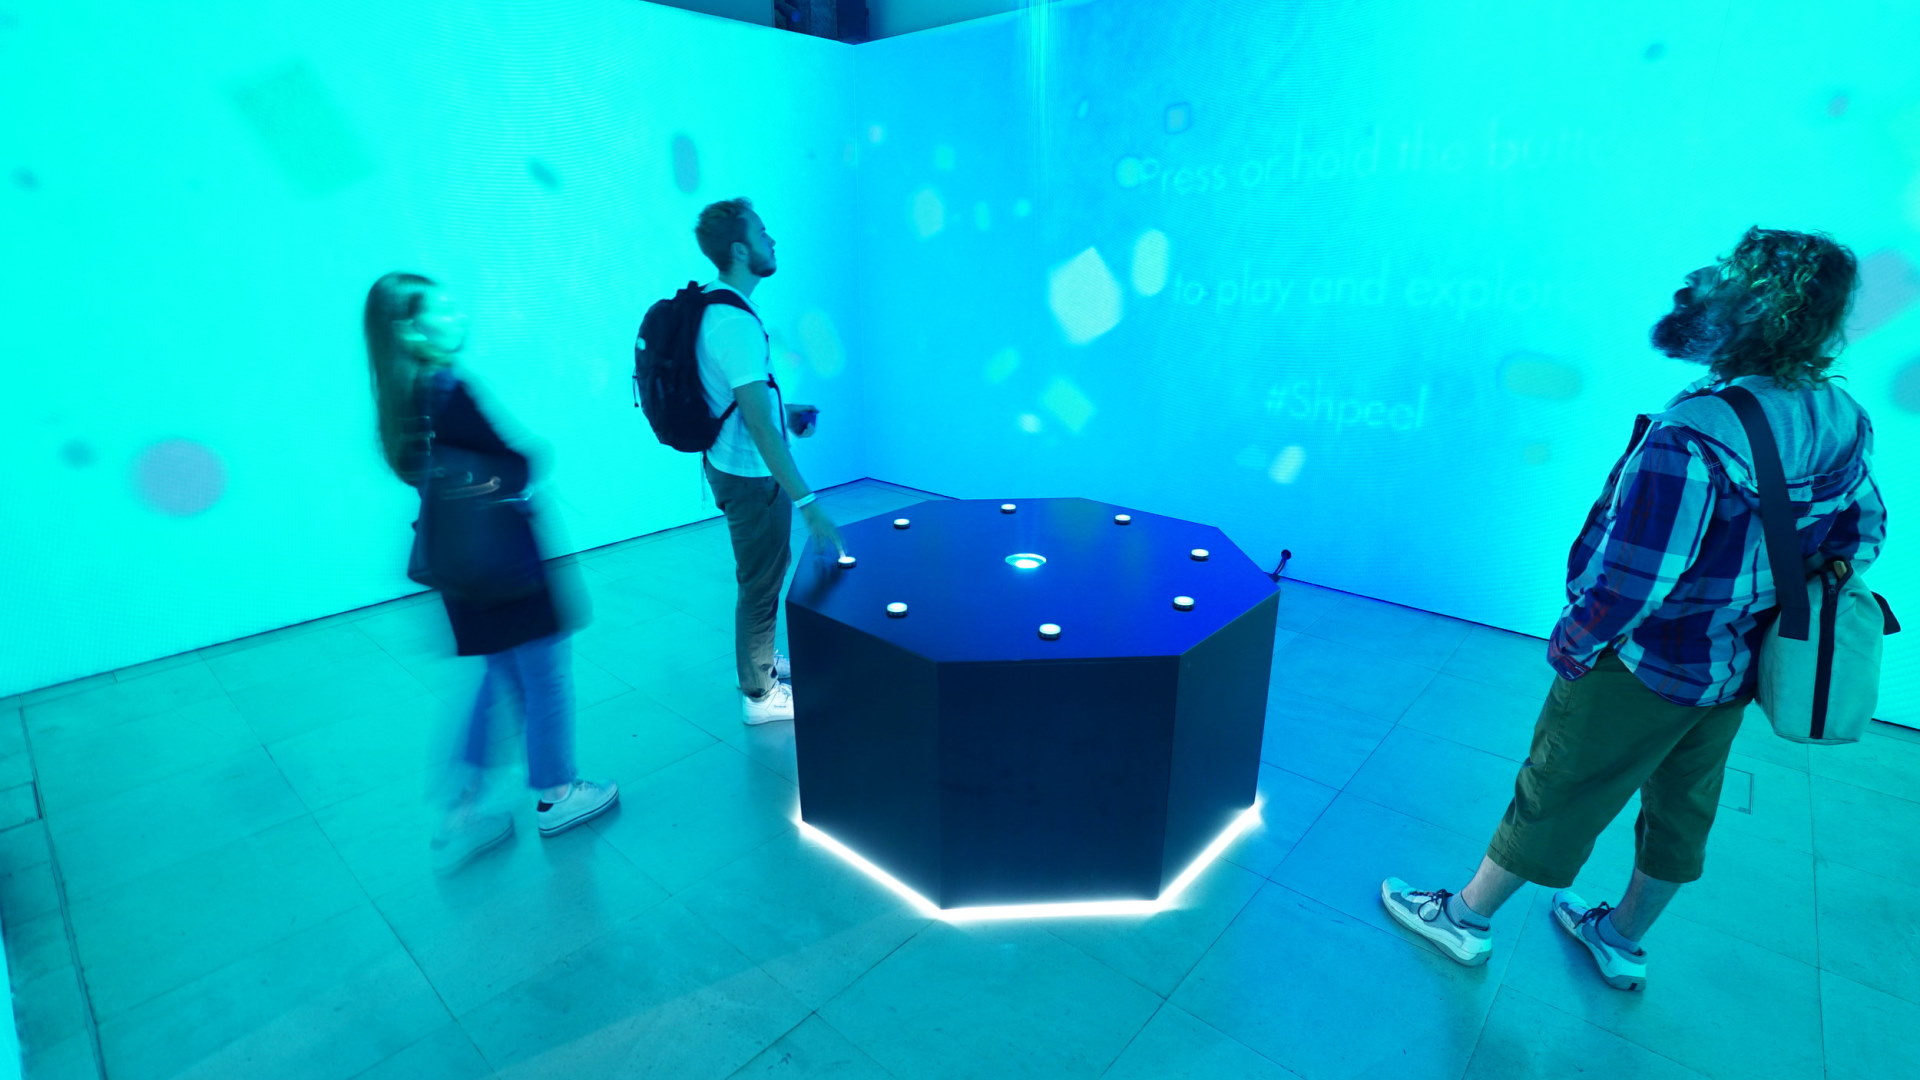 Photo of the installation in action. A large black octagon with 8 white illuminated buttons, and visuals projected onto all 4 surrounding walls. Three people stand around the controller, interacting with it.